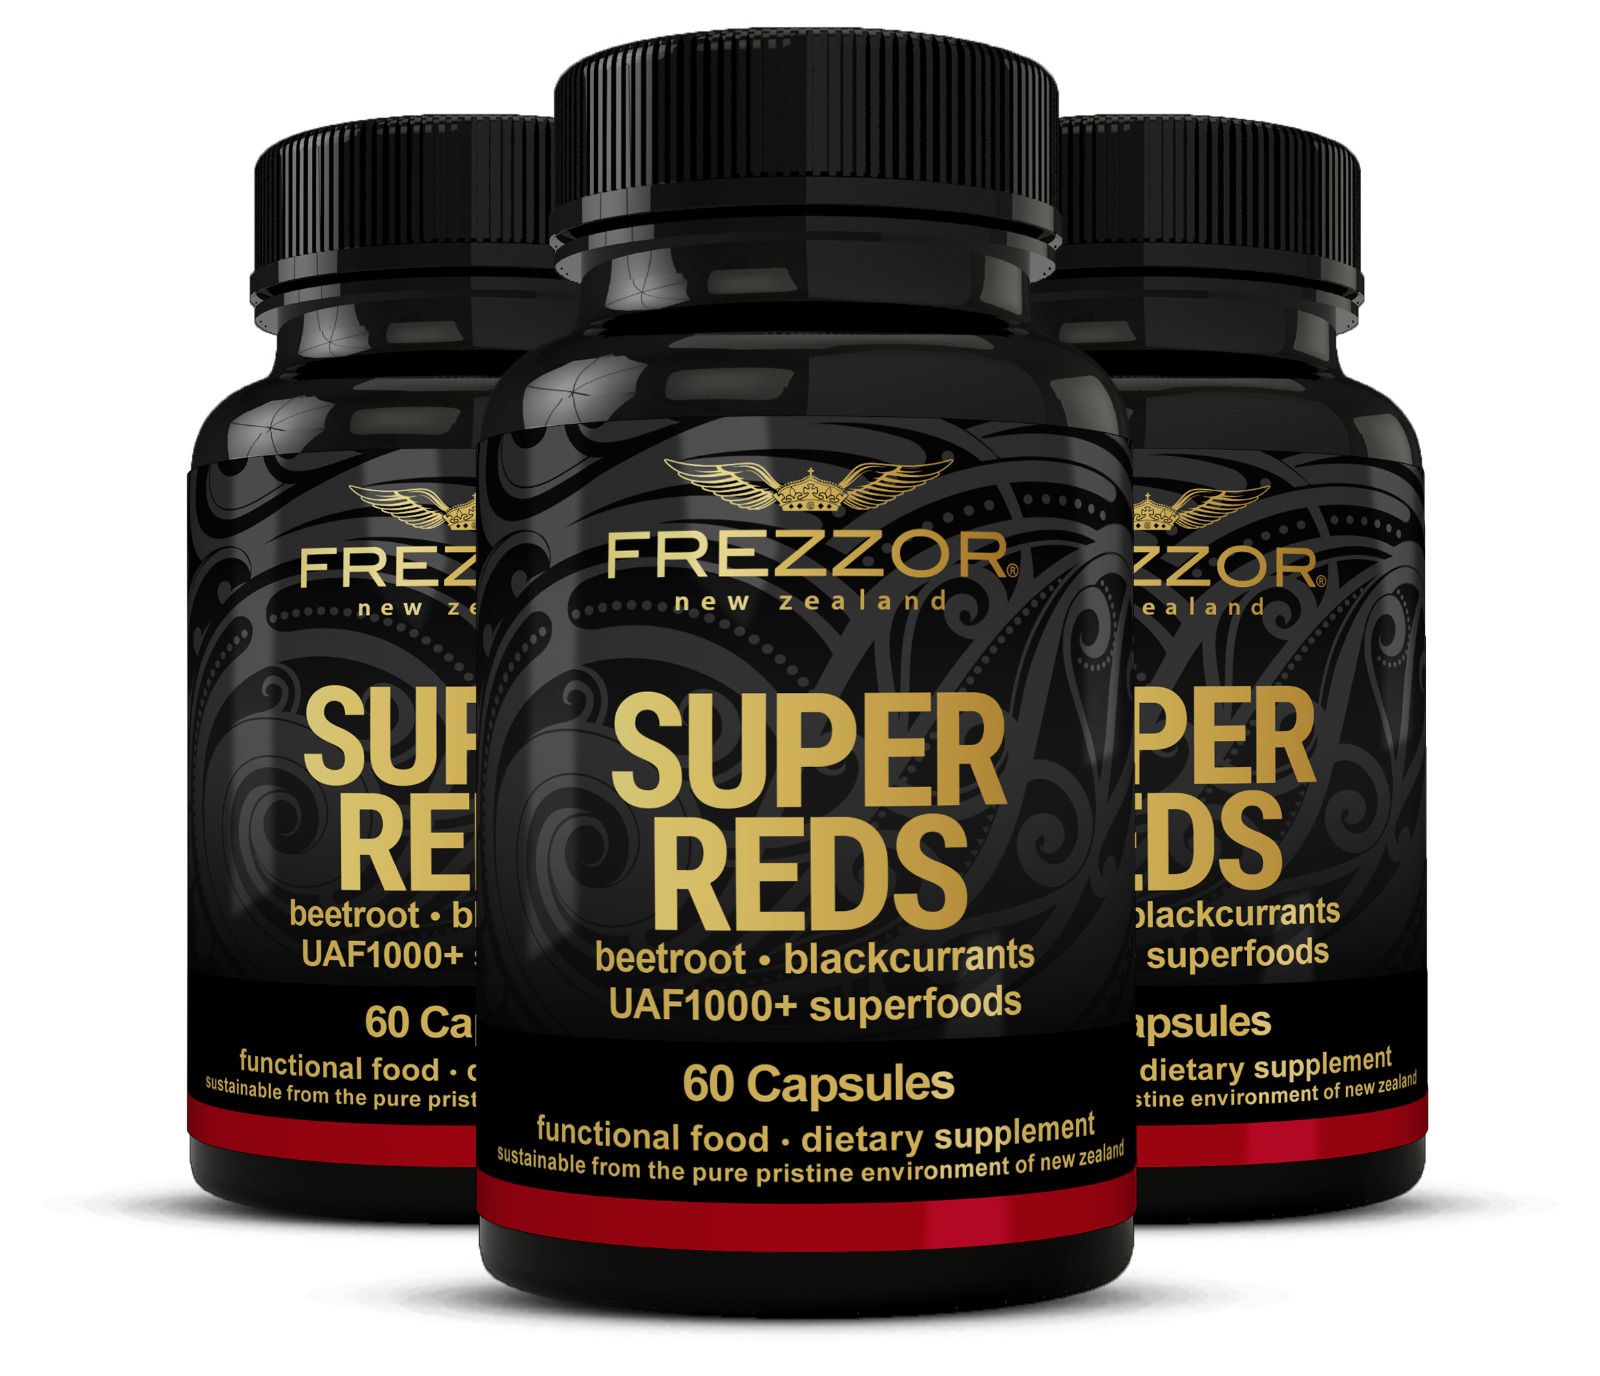 FREZZOR Super Reds Capsules, All-Natural New Zealand Red Superfood 3 Pack